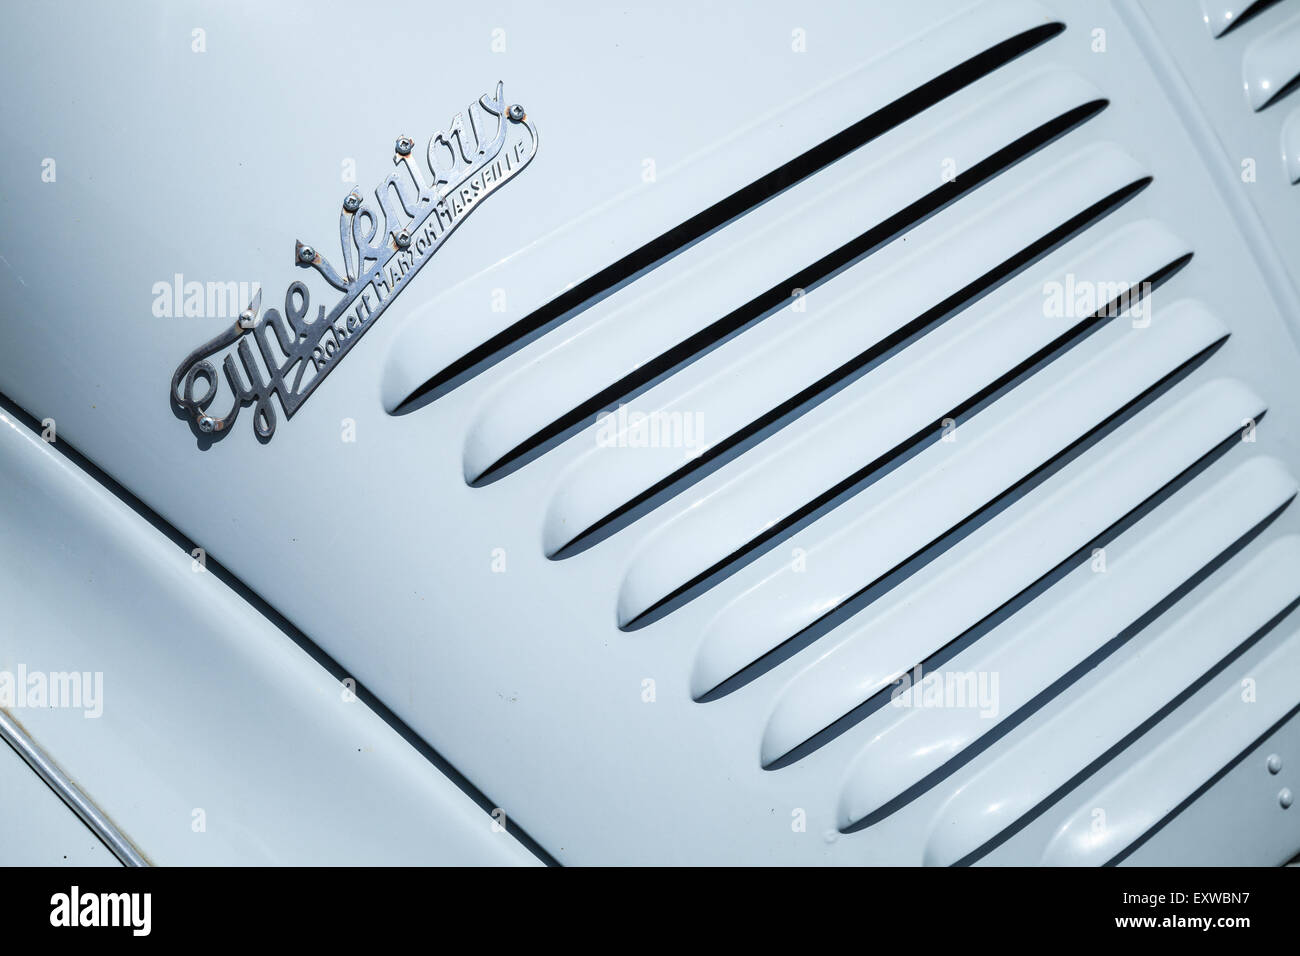 Ajaccio, France - July 6, 2015: rear radiator grille fragment of light blue Renault 4CV old-timer economy car with metal logo Stock Photo